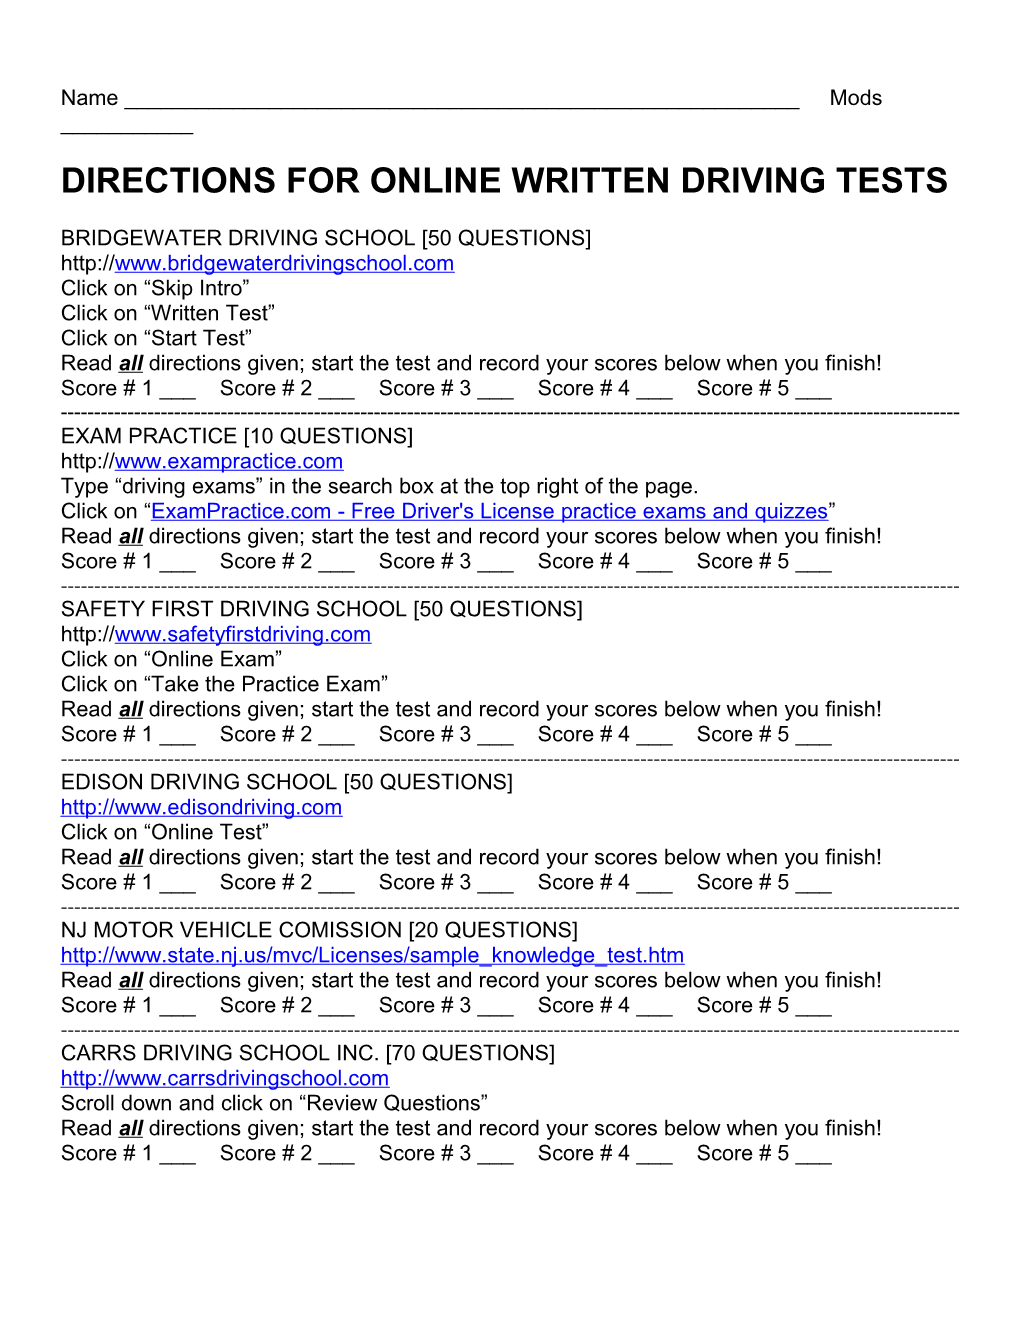 Directions for Online Written Driving Tests